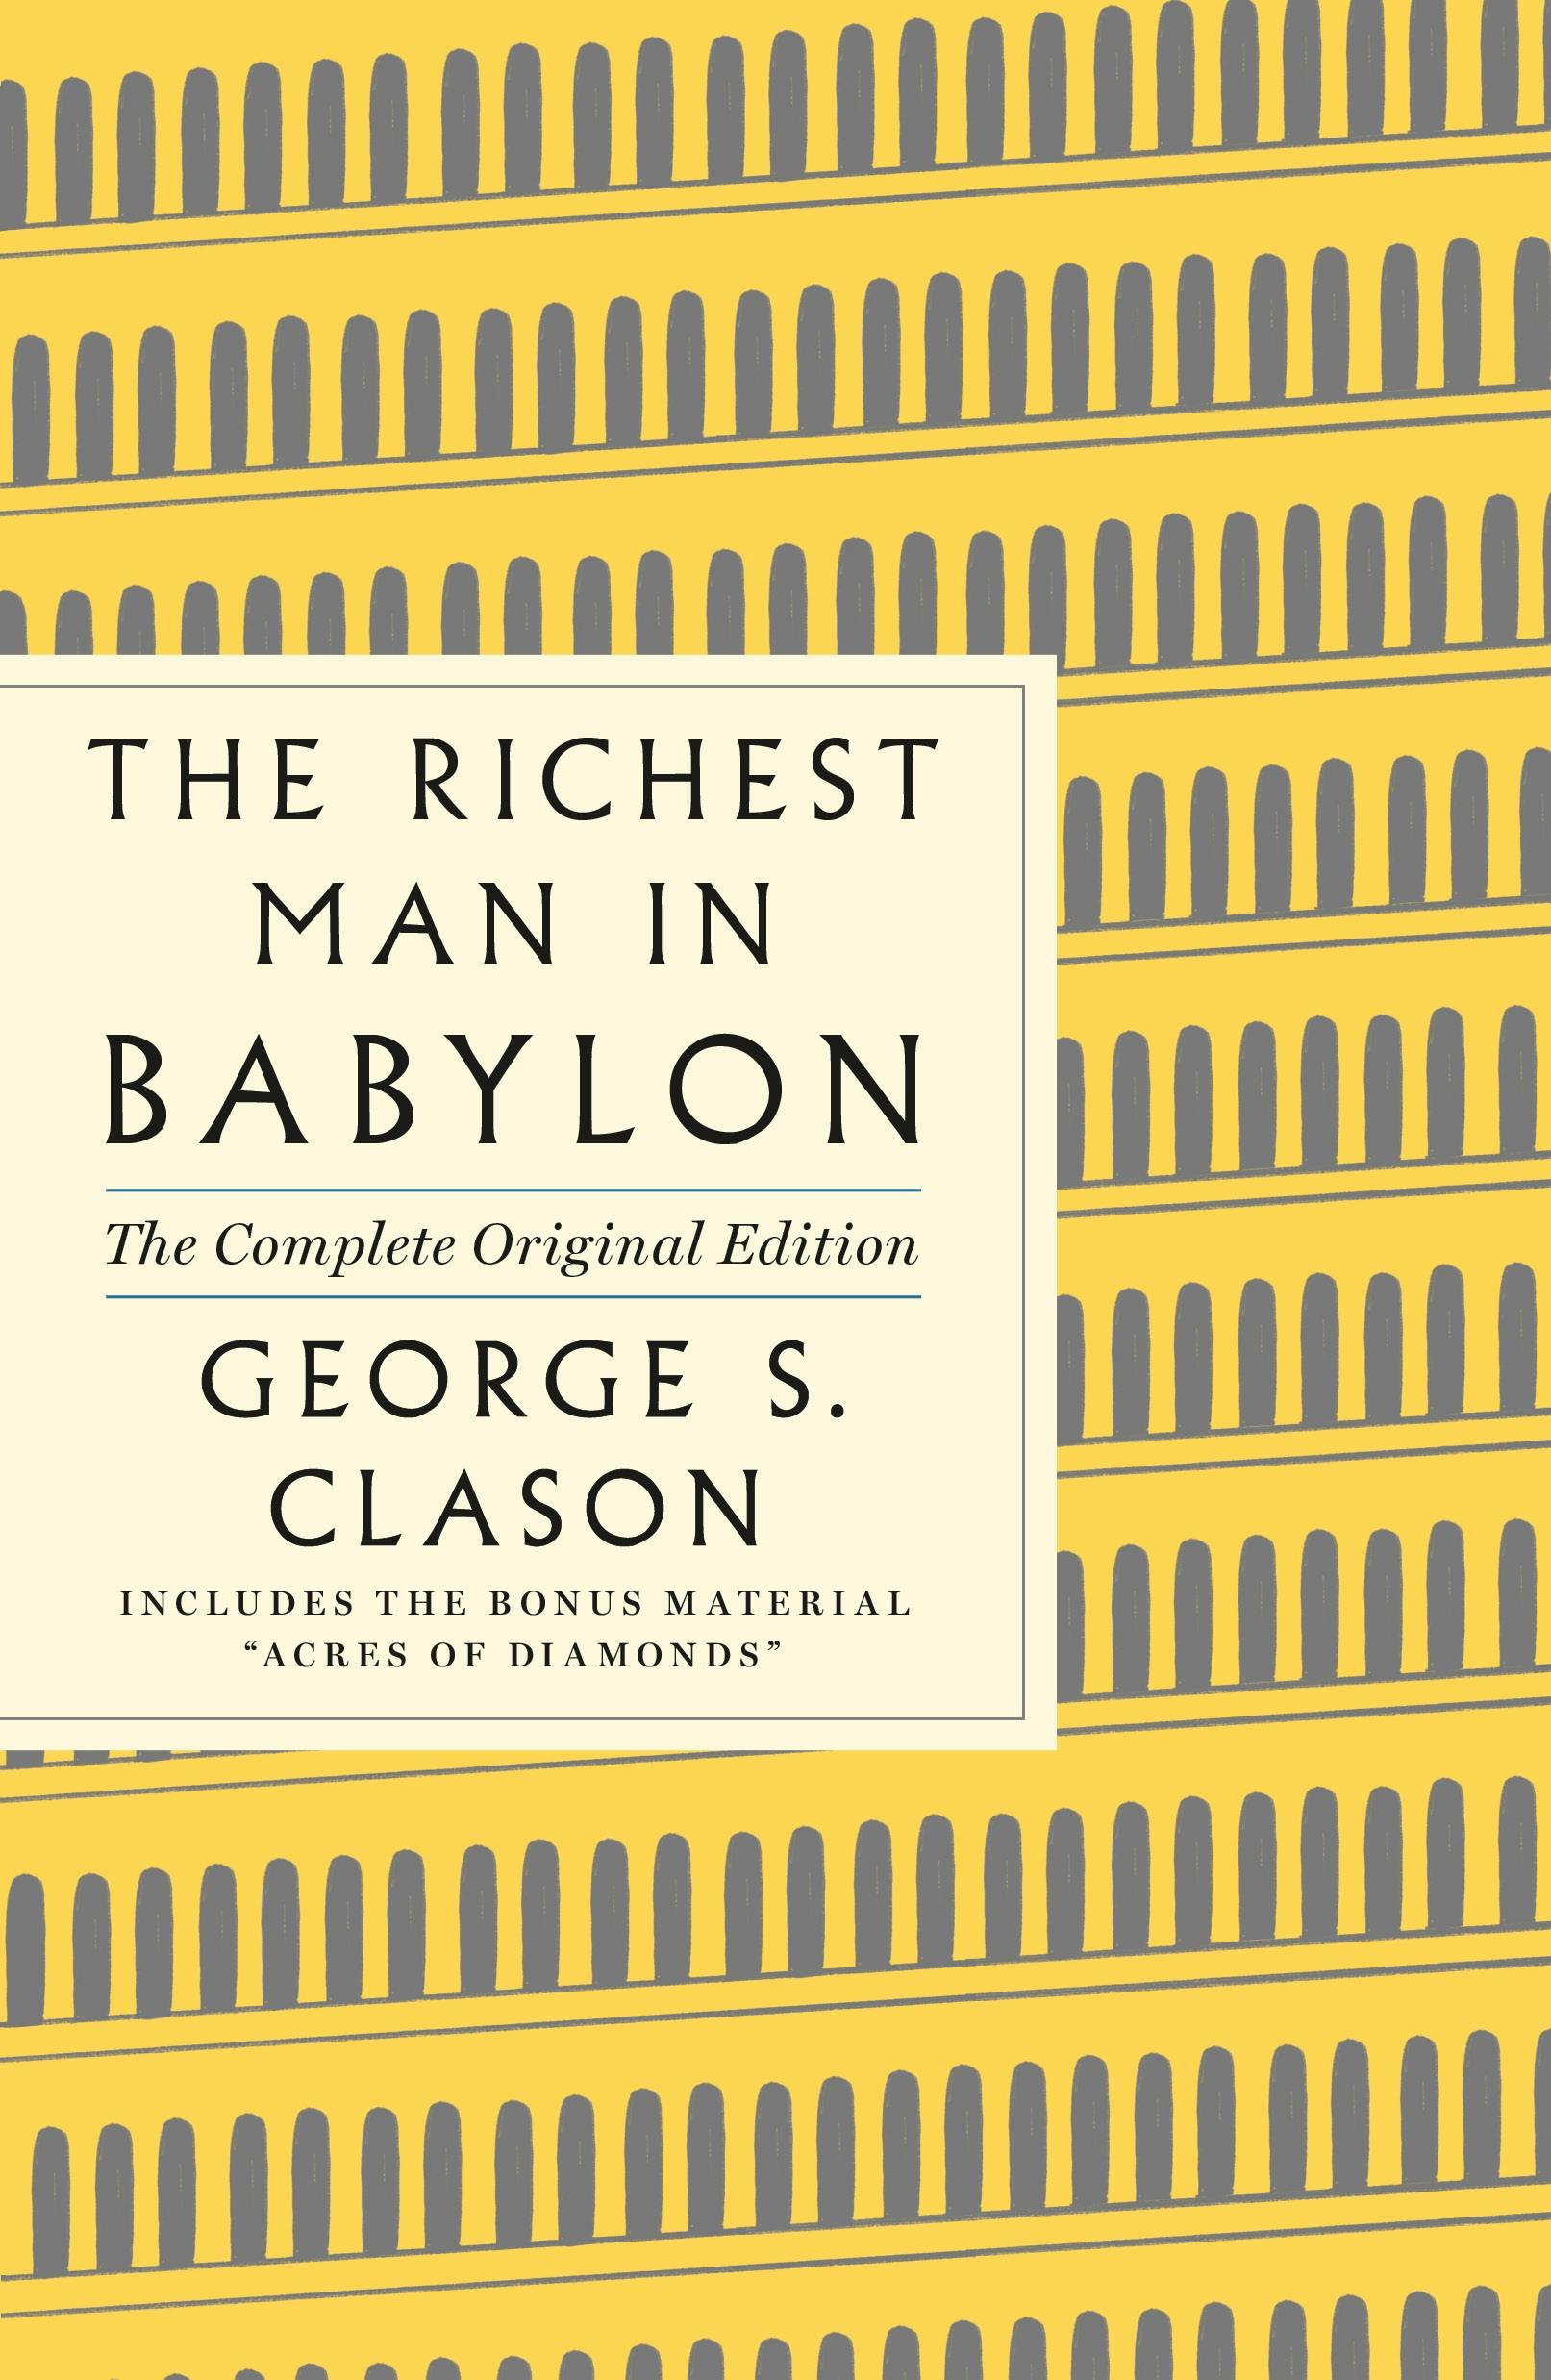 The Richest Man in Babylon: The Complete Original Edition Plus